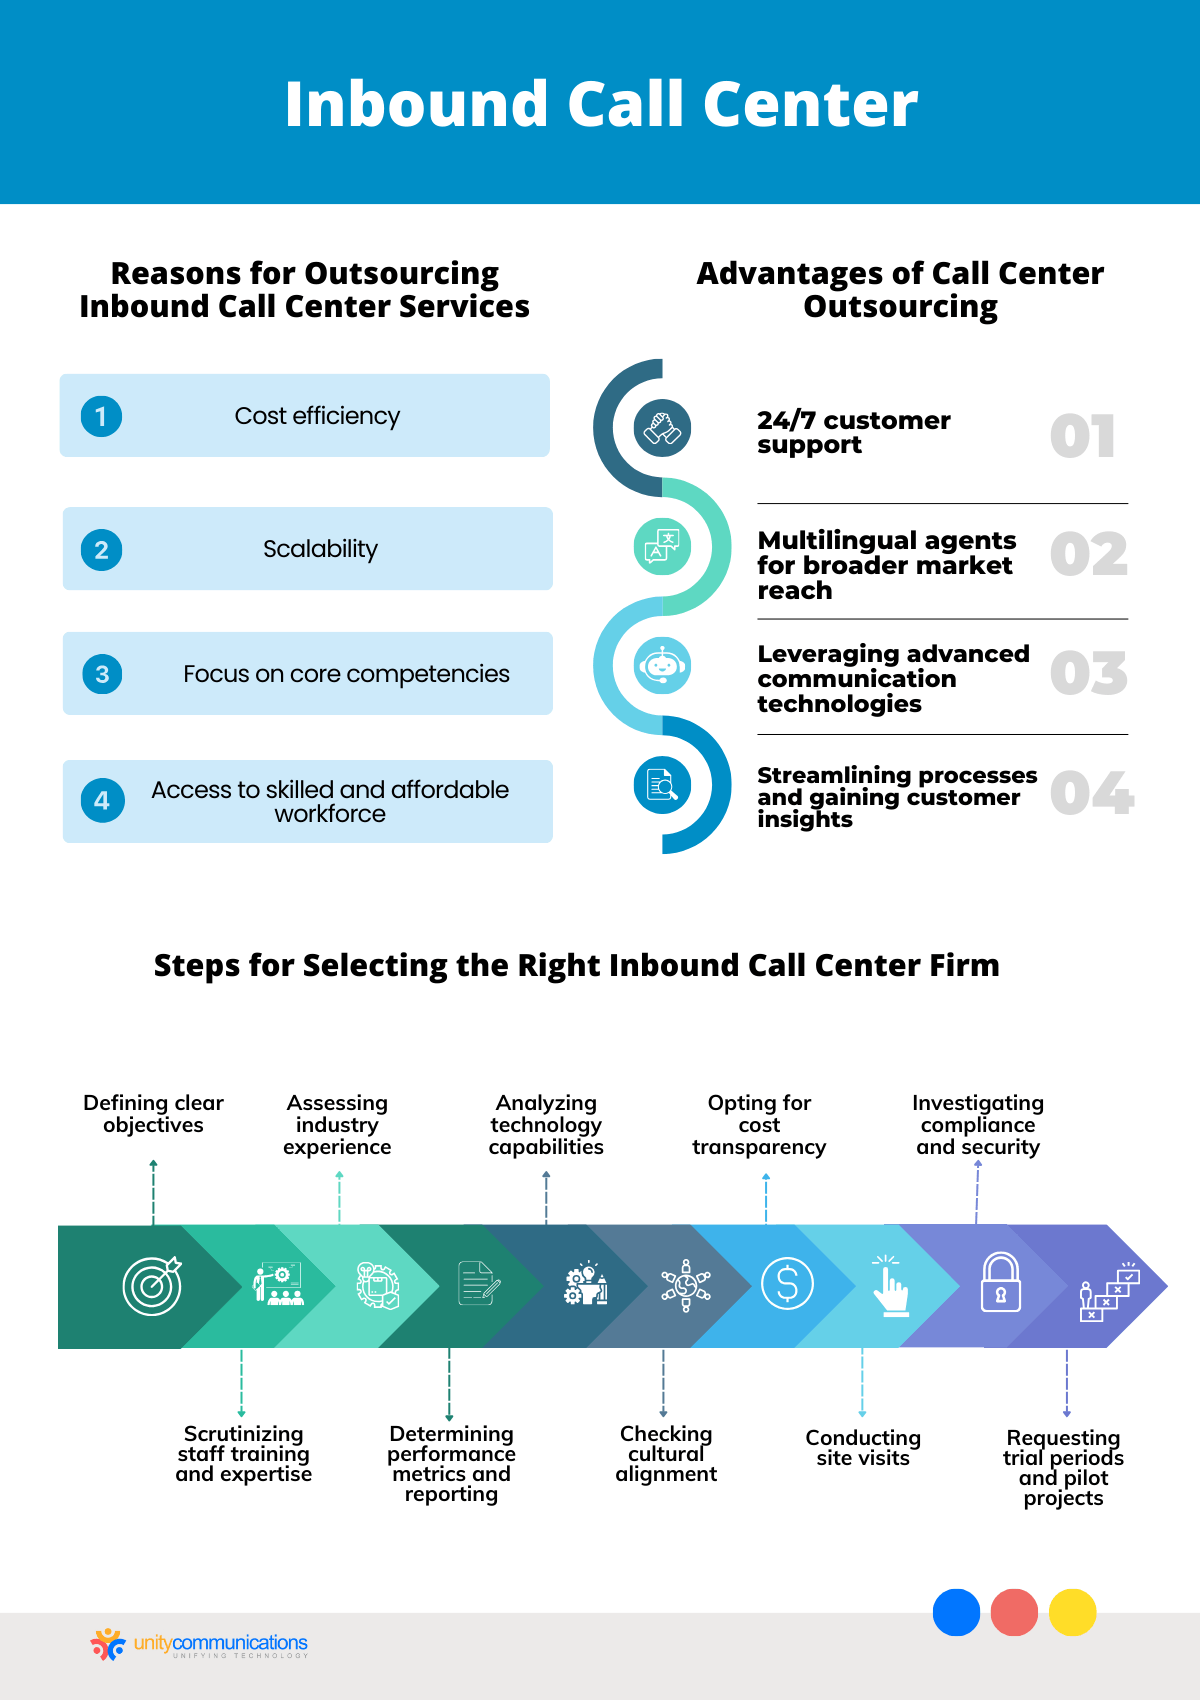 Reasons for Outsourcing Inbound Call Center Services